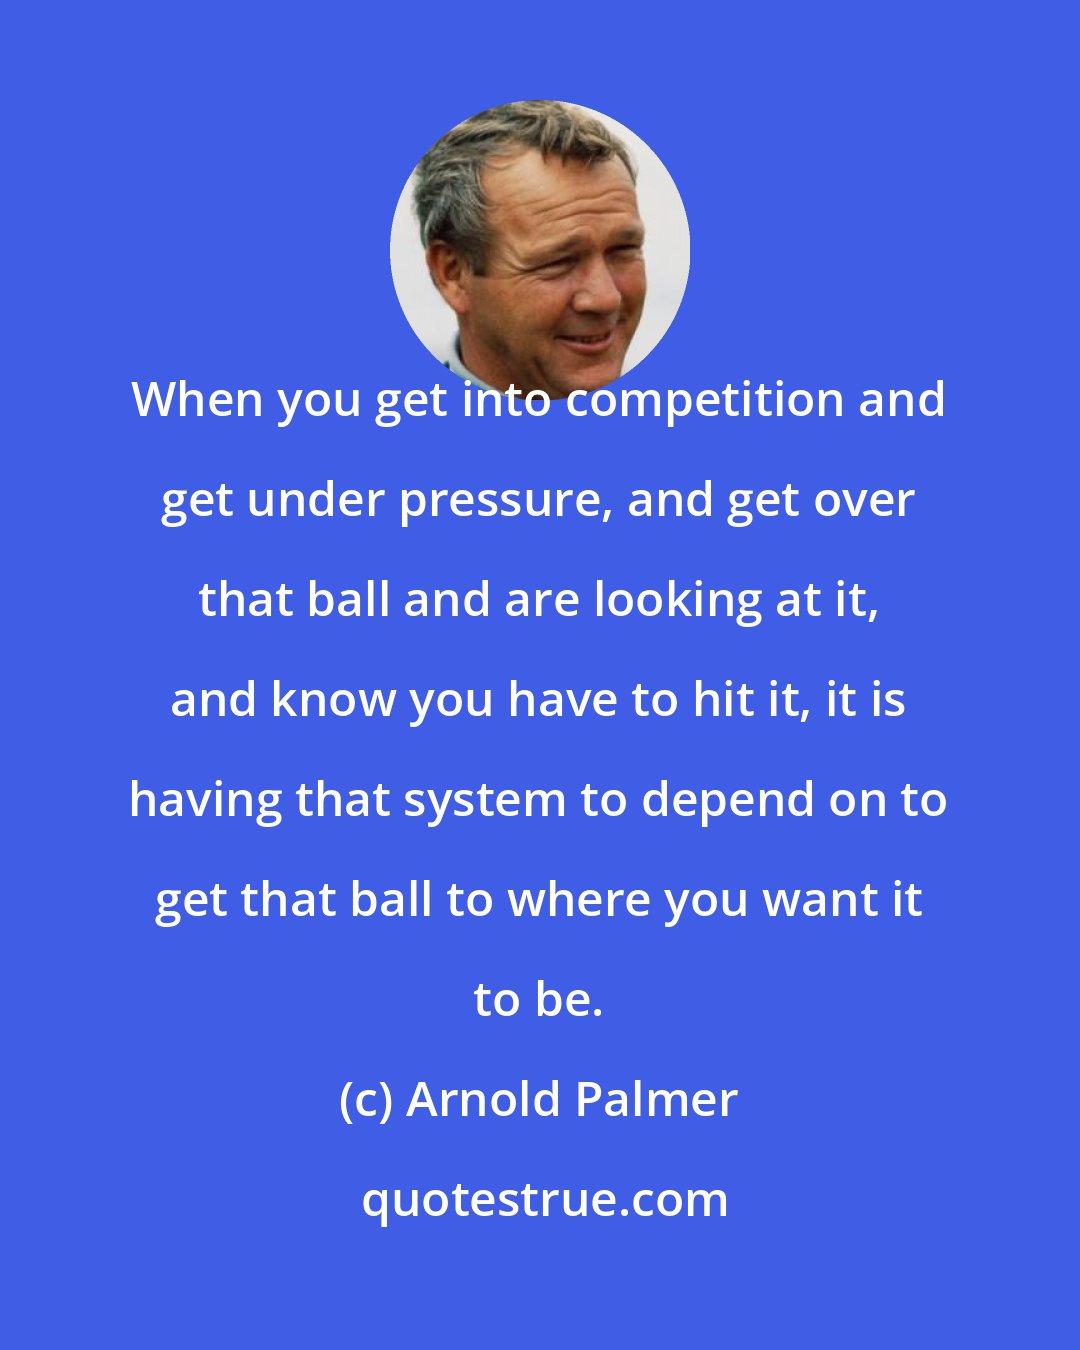 Arnold Palmer: When you get into competition and get under pressure, and get over that ball and are looking at it, and know you have to hit it, it is having that system to depend on to get that ball to where you want it to be.